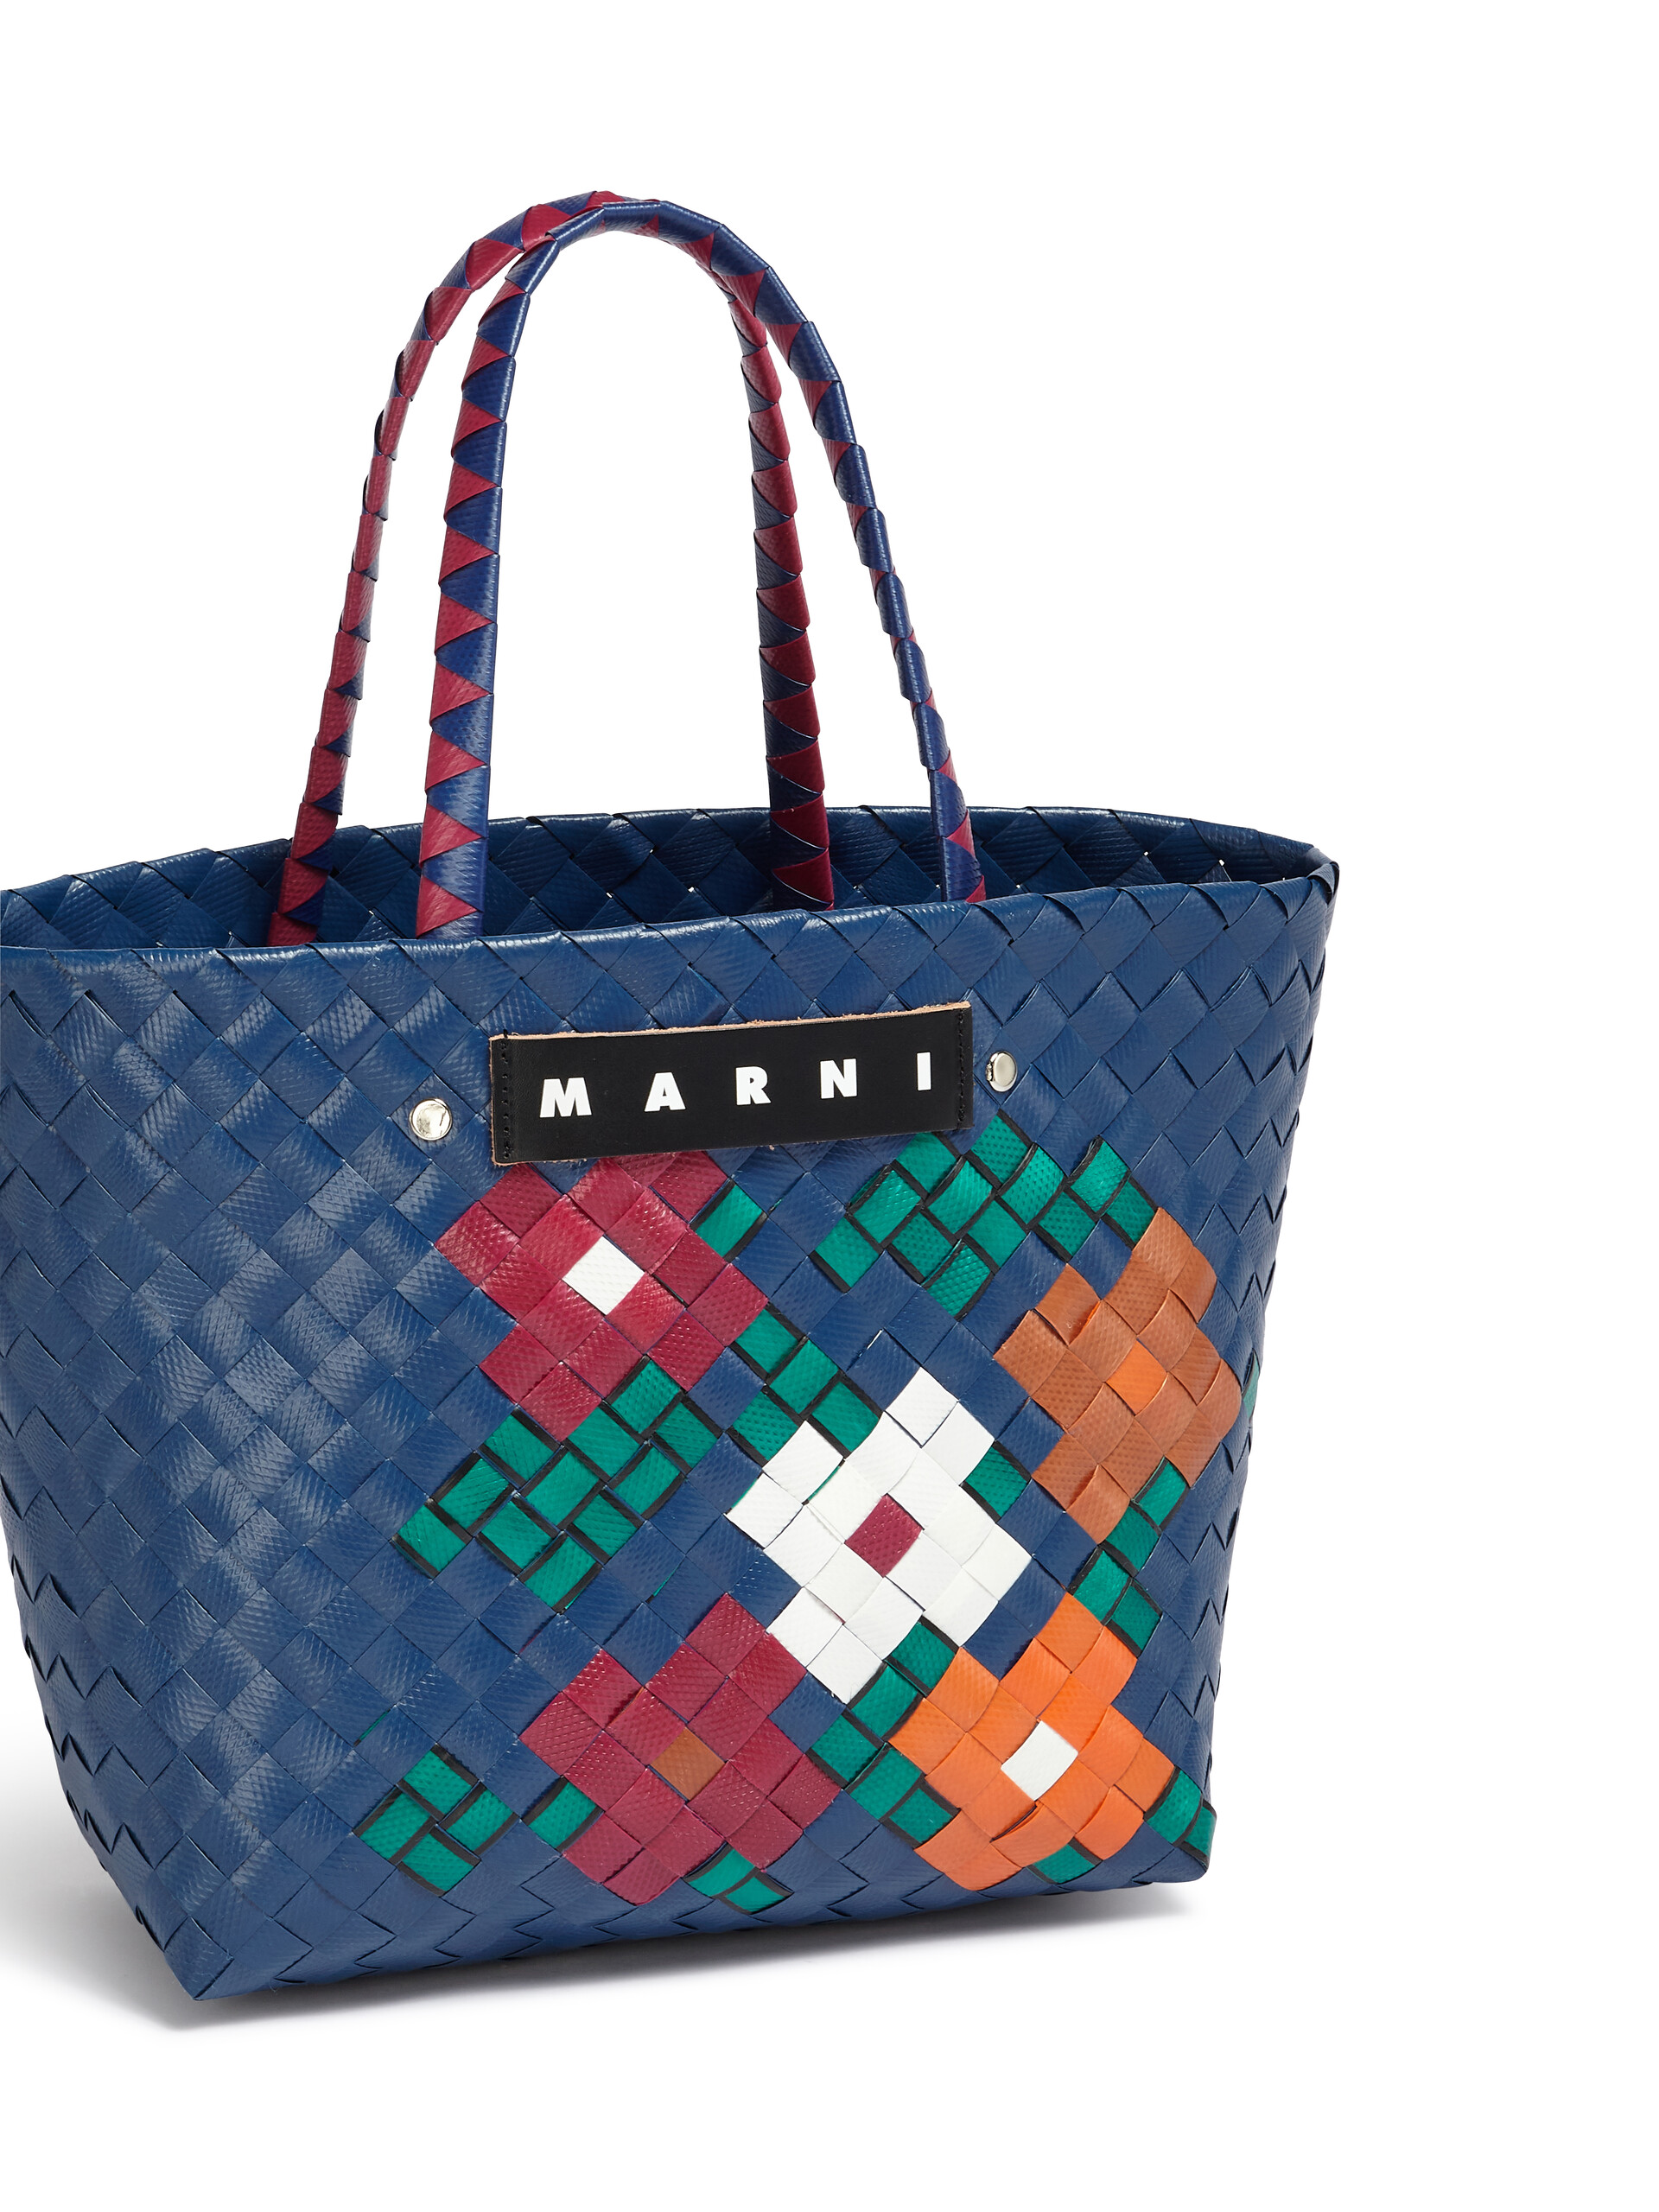 MARNI MARKET small bag in blue flower motif - Shopping Bags - Image 4